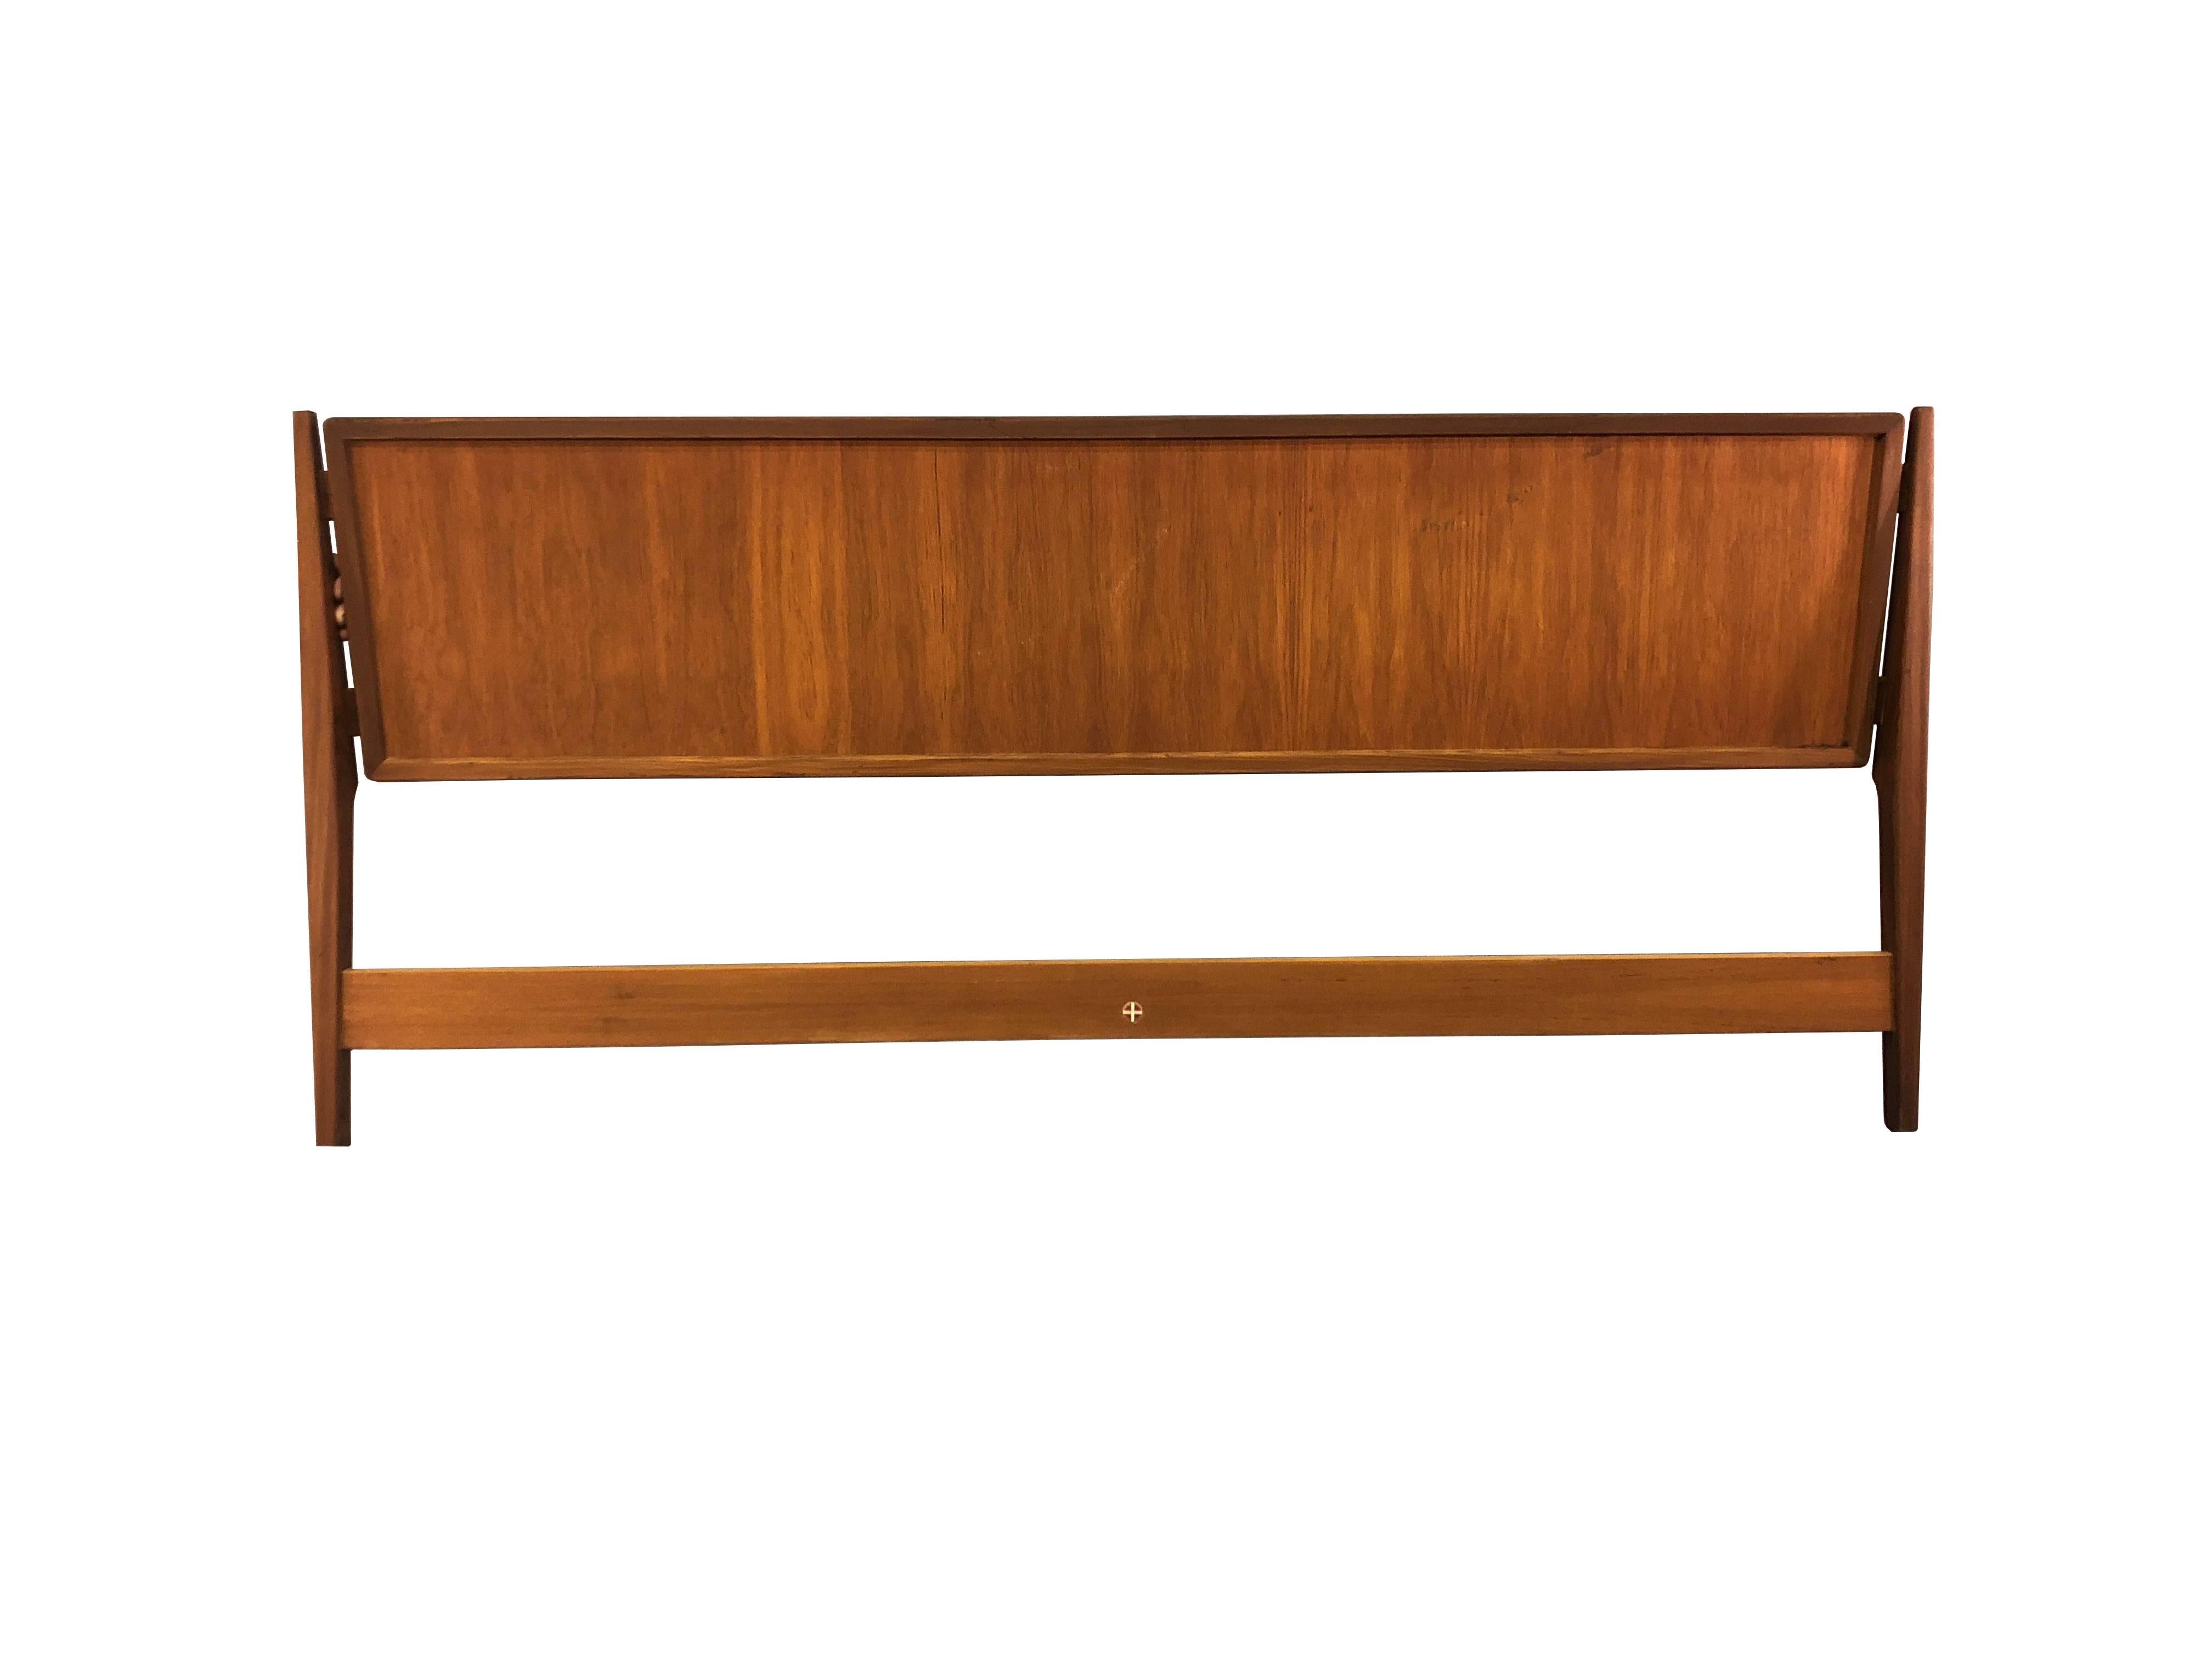 Danish Teak King-Size Headboard In Excellent Condition For Sale In Amherst, NH